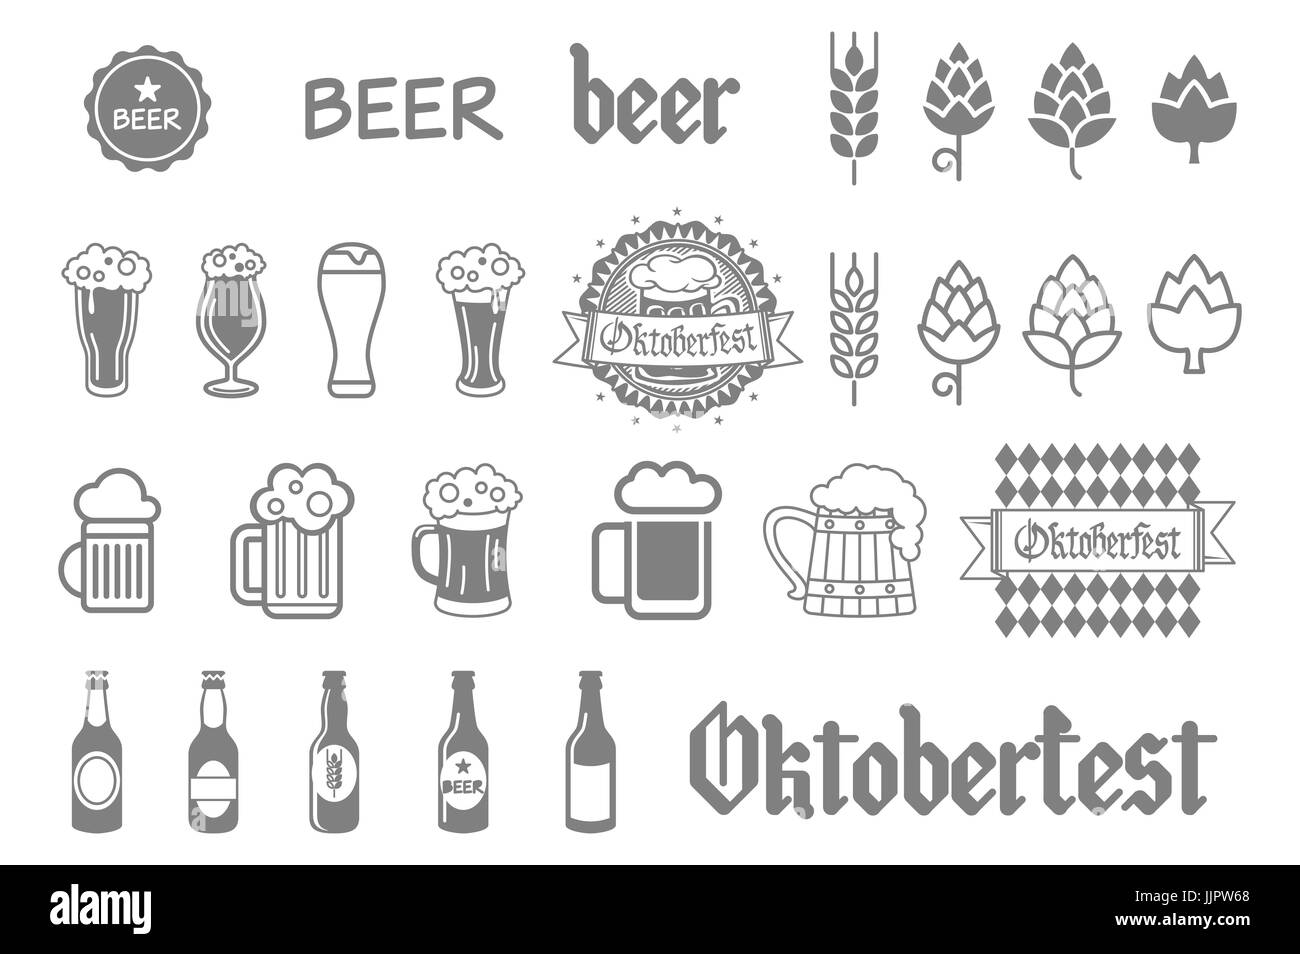 Simple set of beer related vector icons for your design art Stock Vector